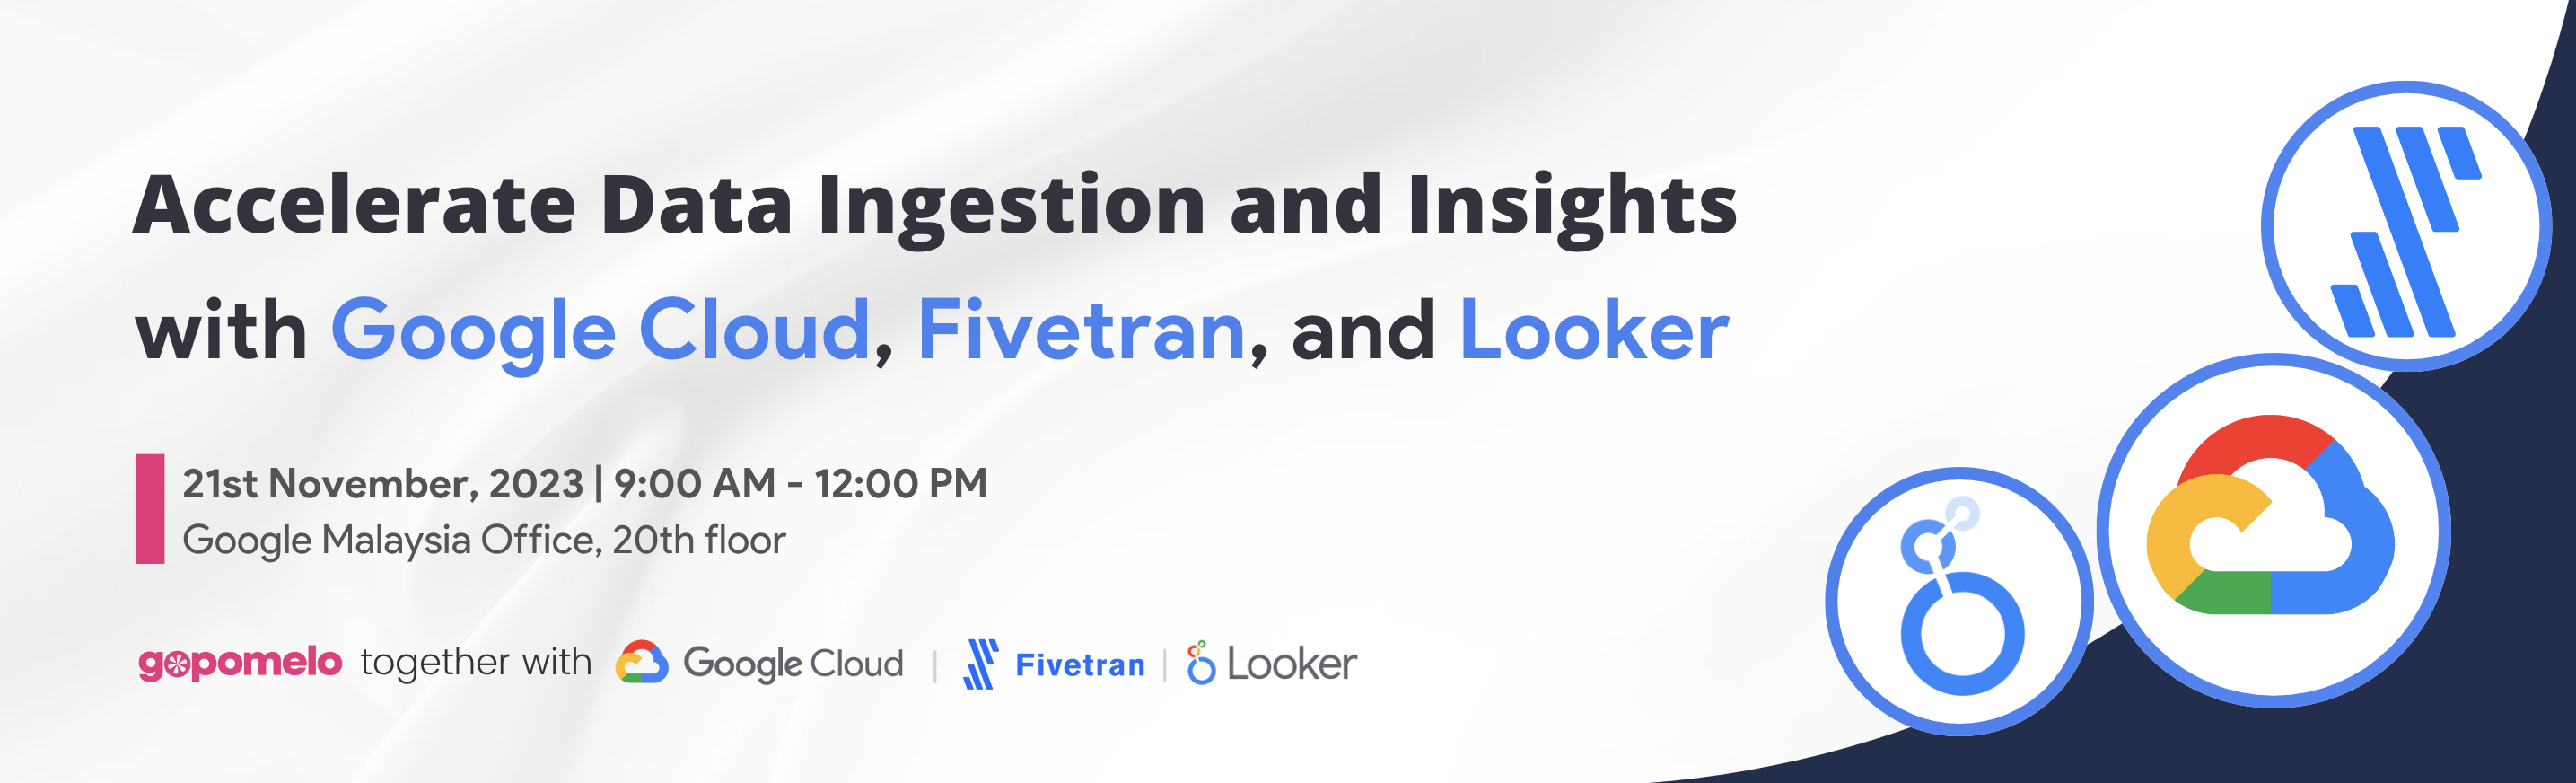 Accelerate Data Ingestion and Insights with GCP, Fivetran, and Looker